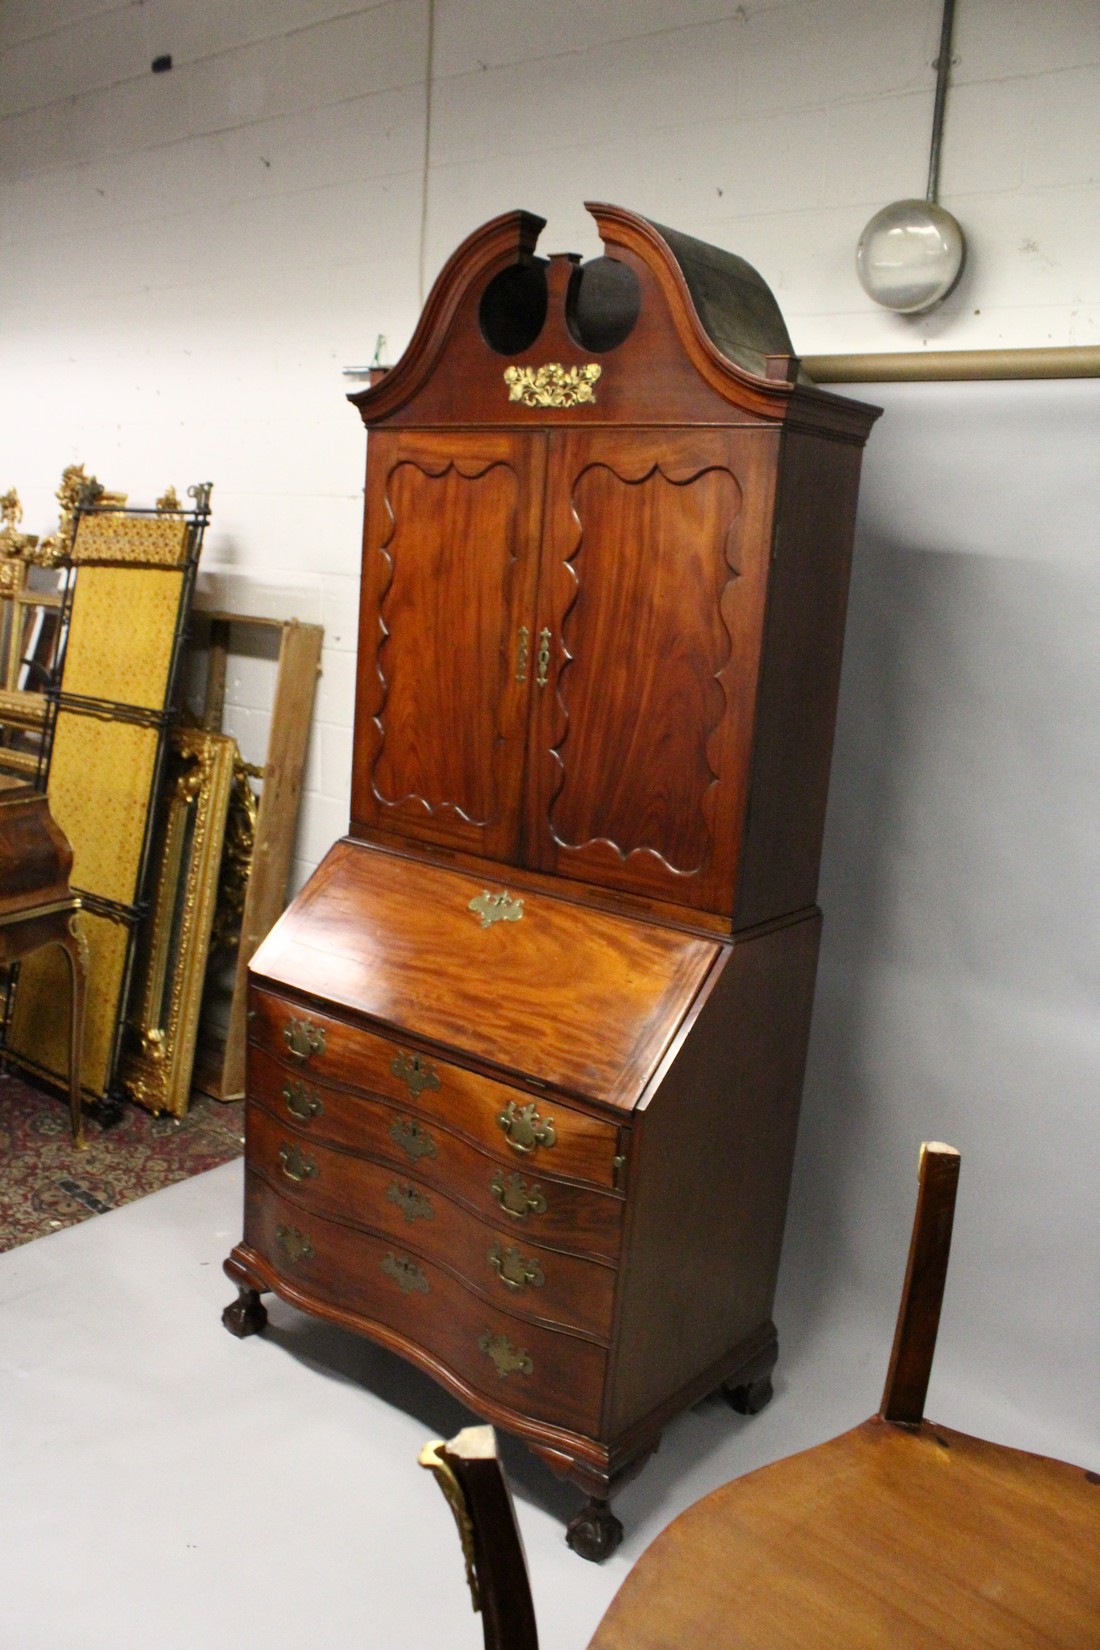 A SUPERB 18TH CENTURY AMERICAN, BOSTON, MAHOGANY, BUREAU BOOKCASE, the top with shaped cornice - Image 3 of 15